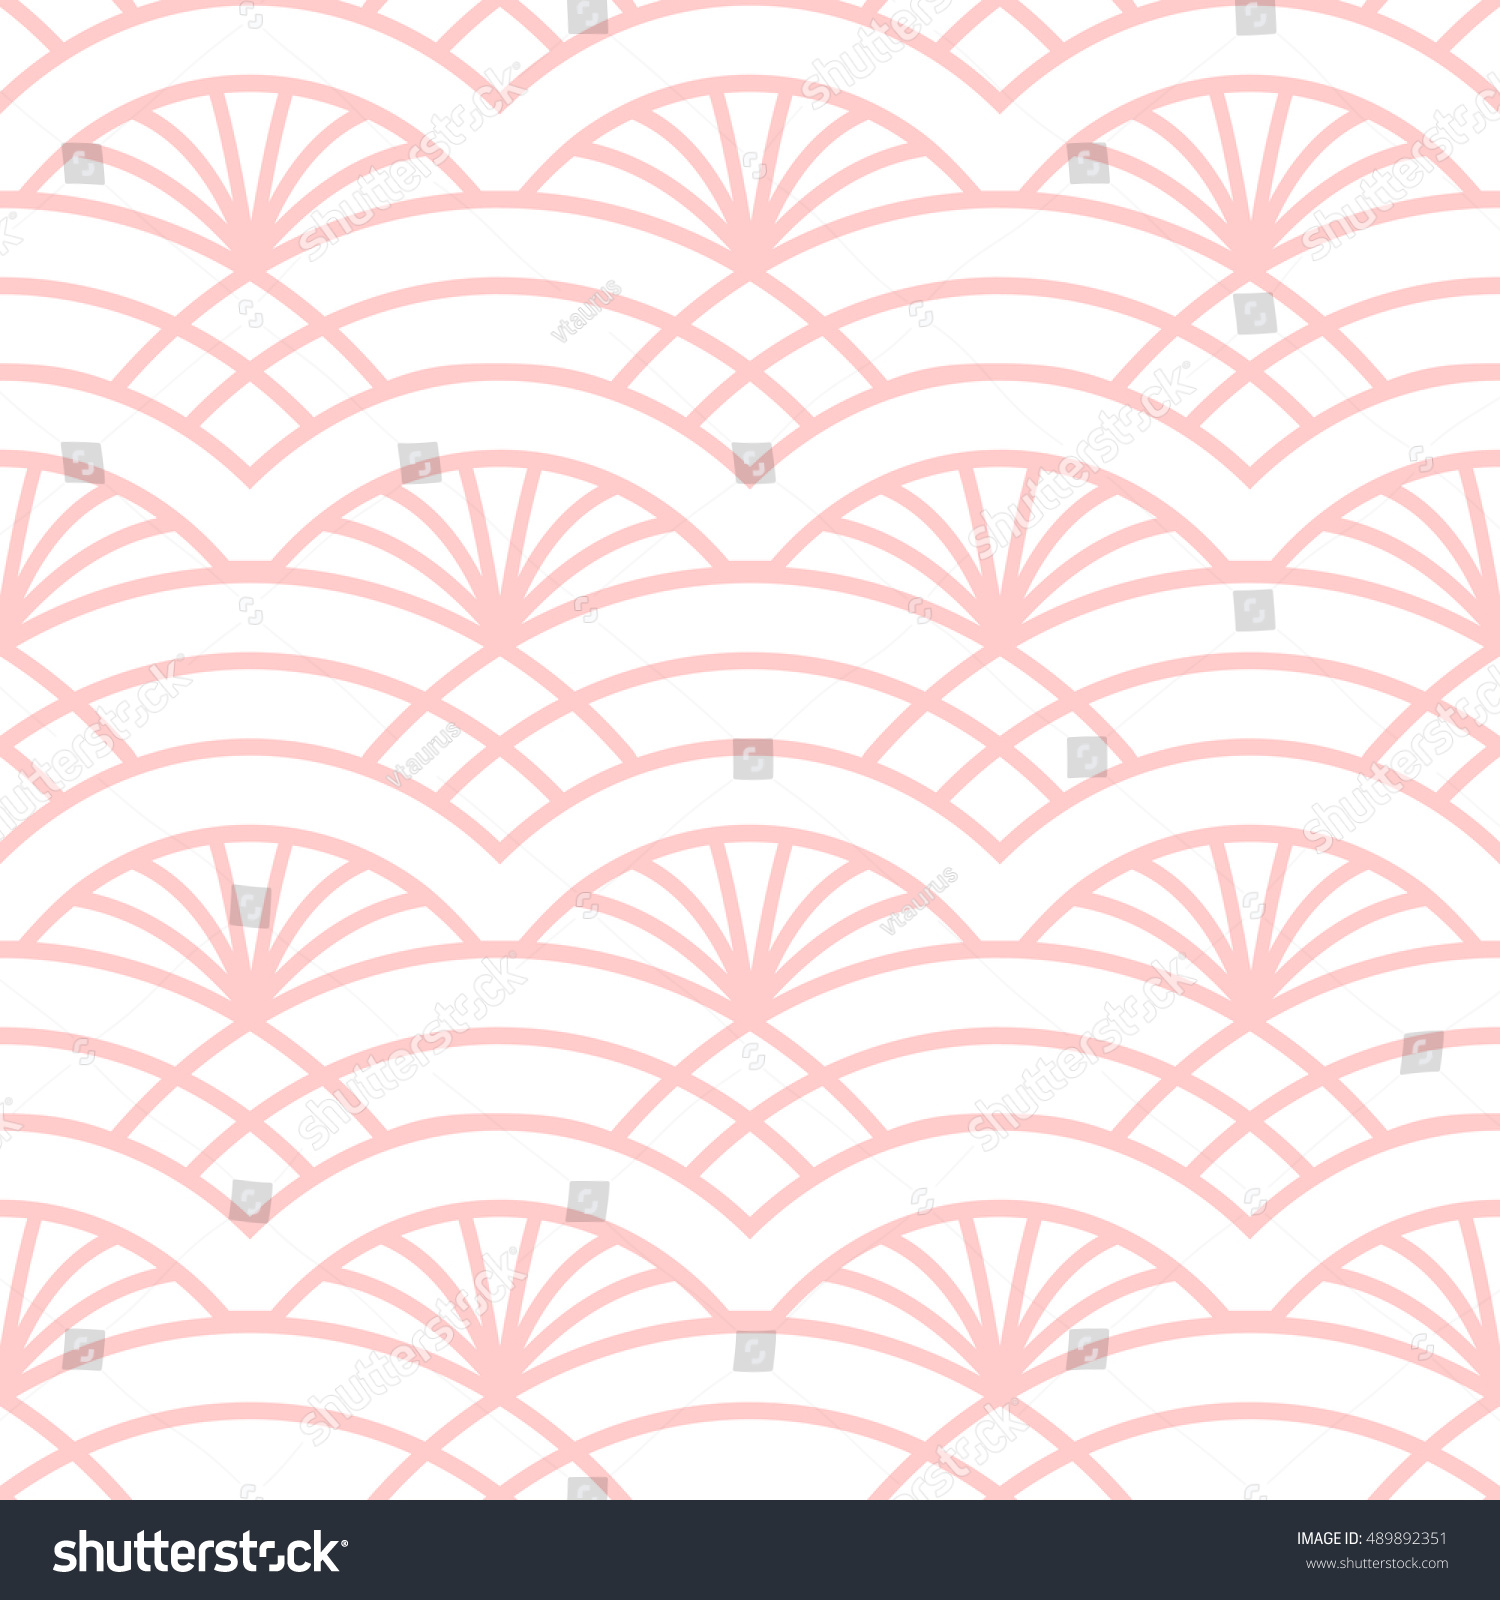 stock vector trellis seamless pattern oriental colorful print in white and pink great for cover design fabric 489892351